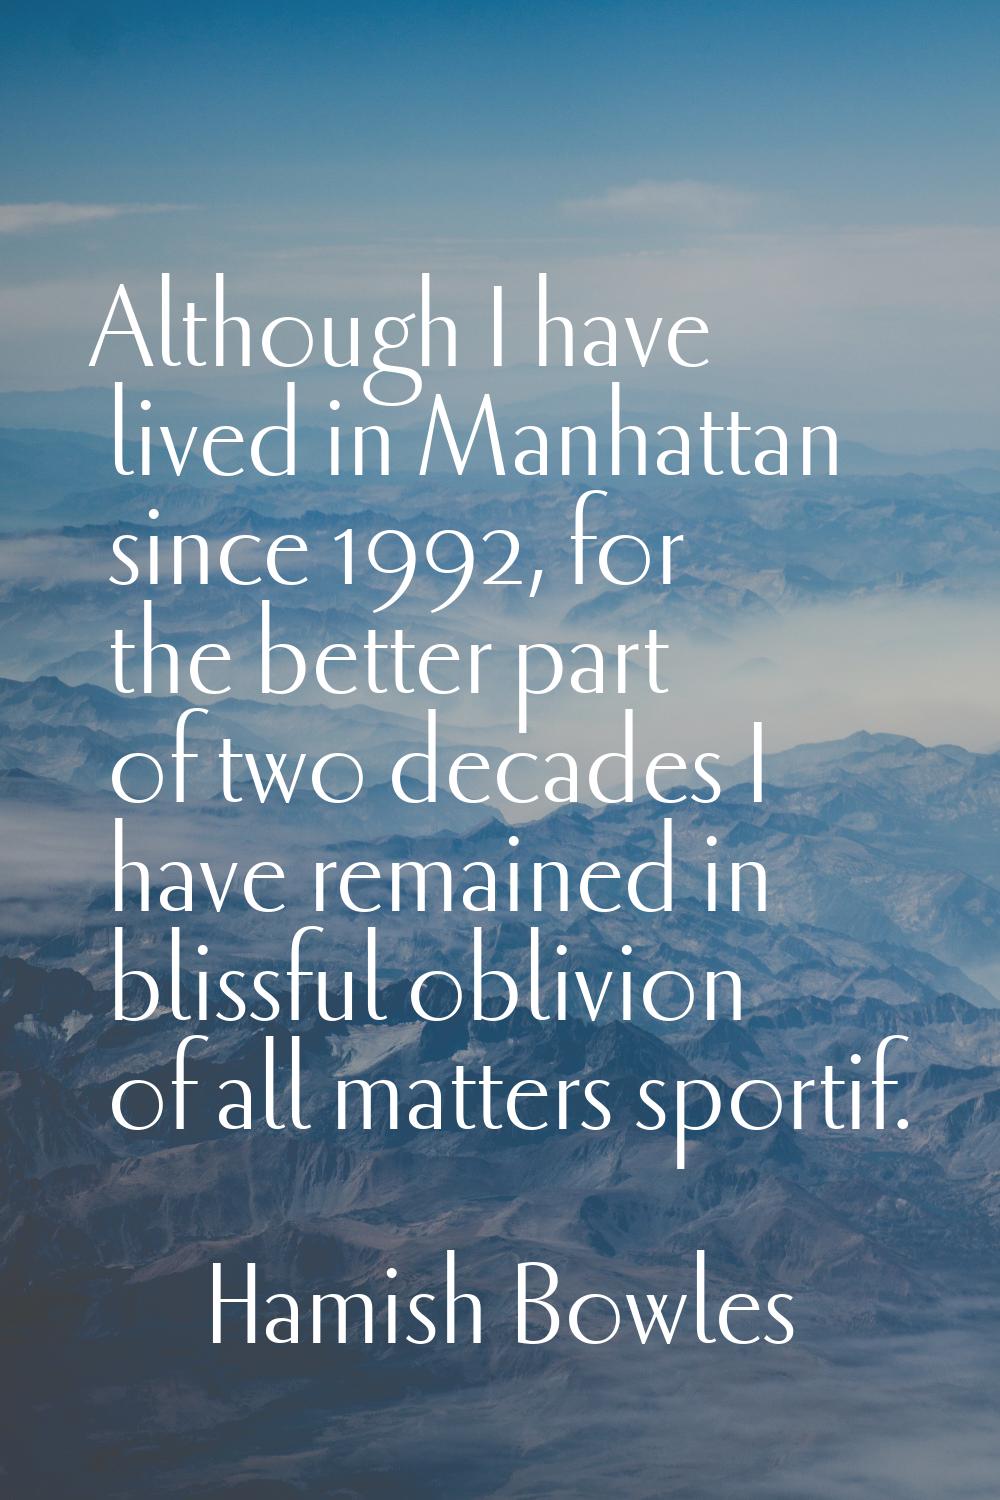 Although I have lived in Manhattan since 1992, for the better part of two decades I have remained i